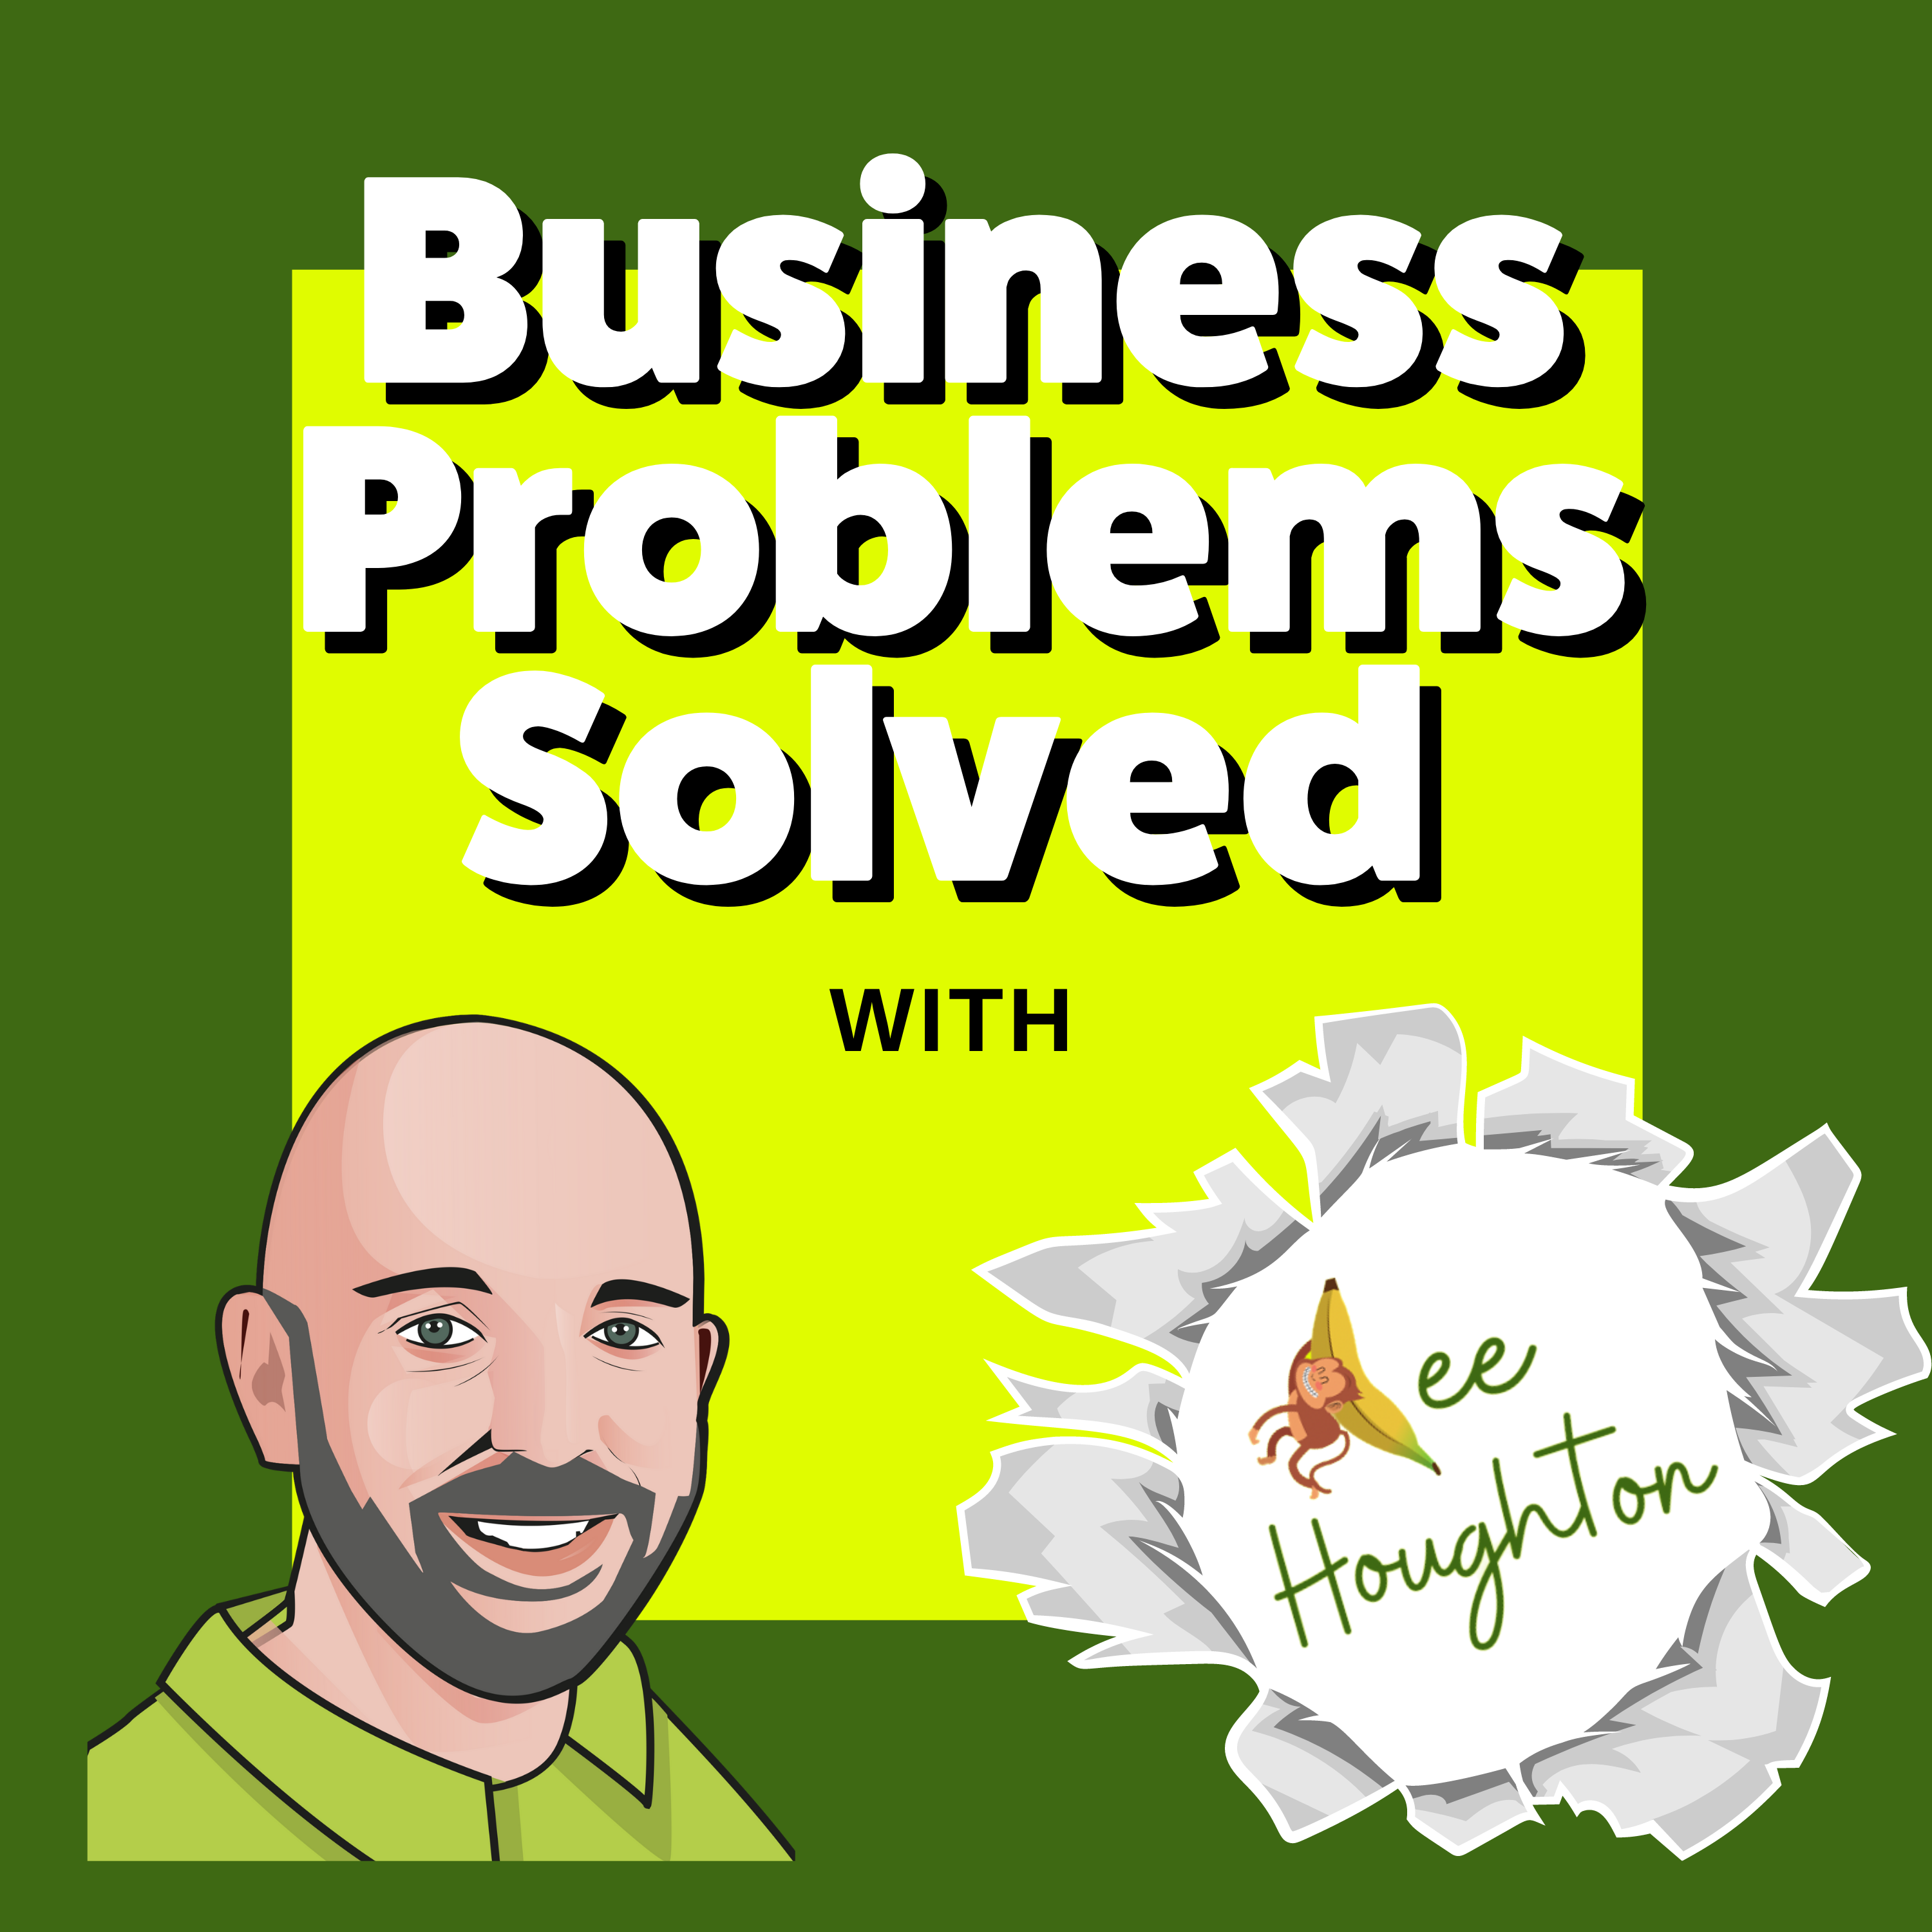 The Business Mastermind & Business Problems Solved